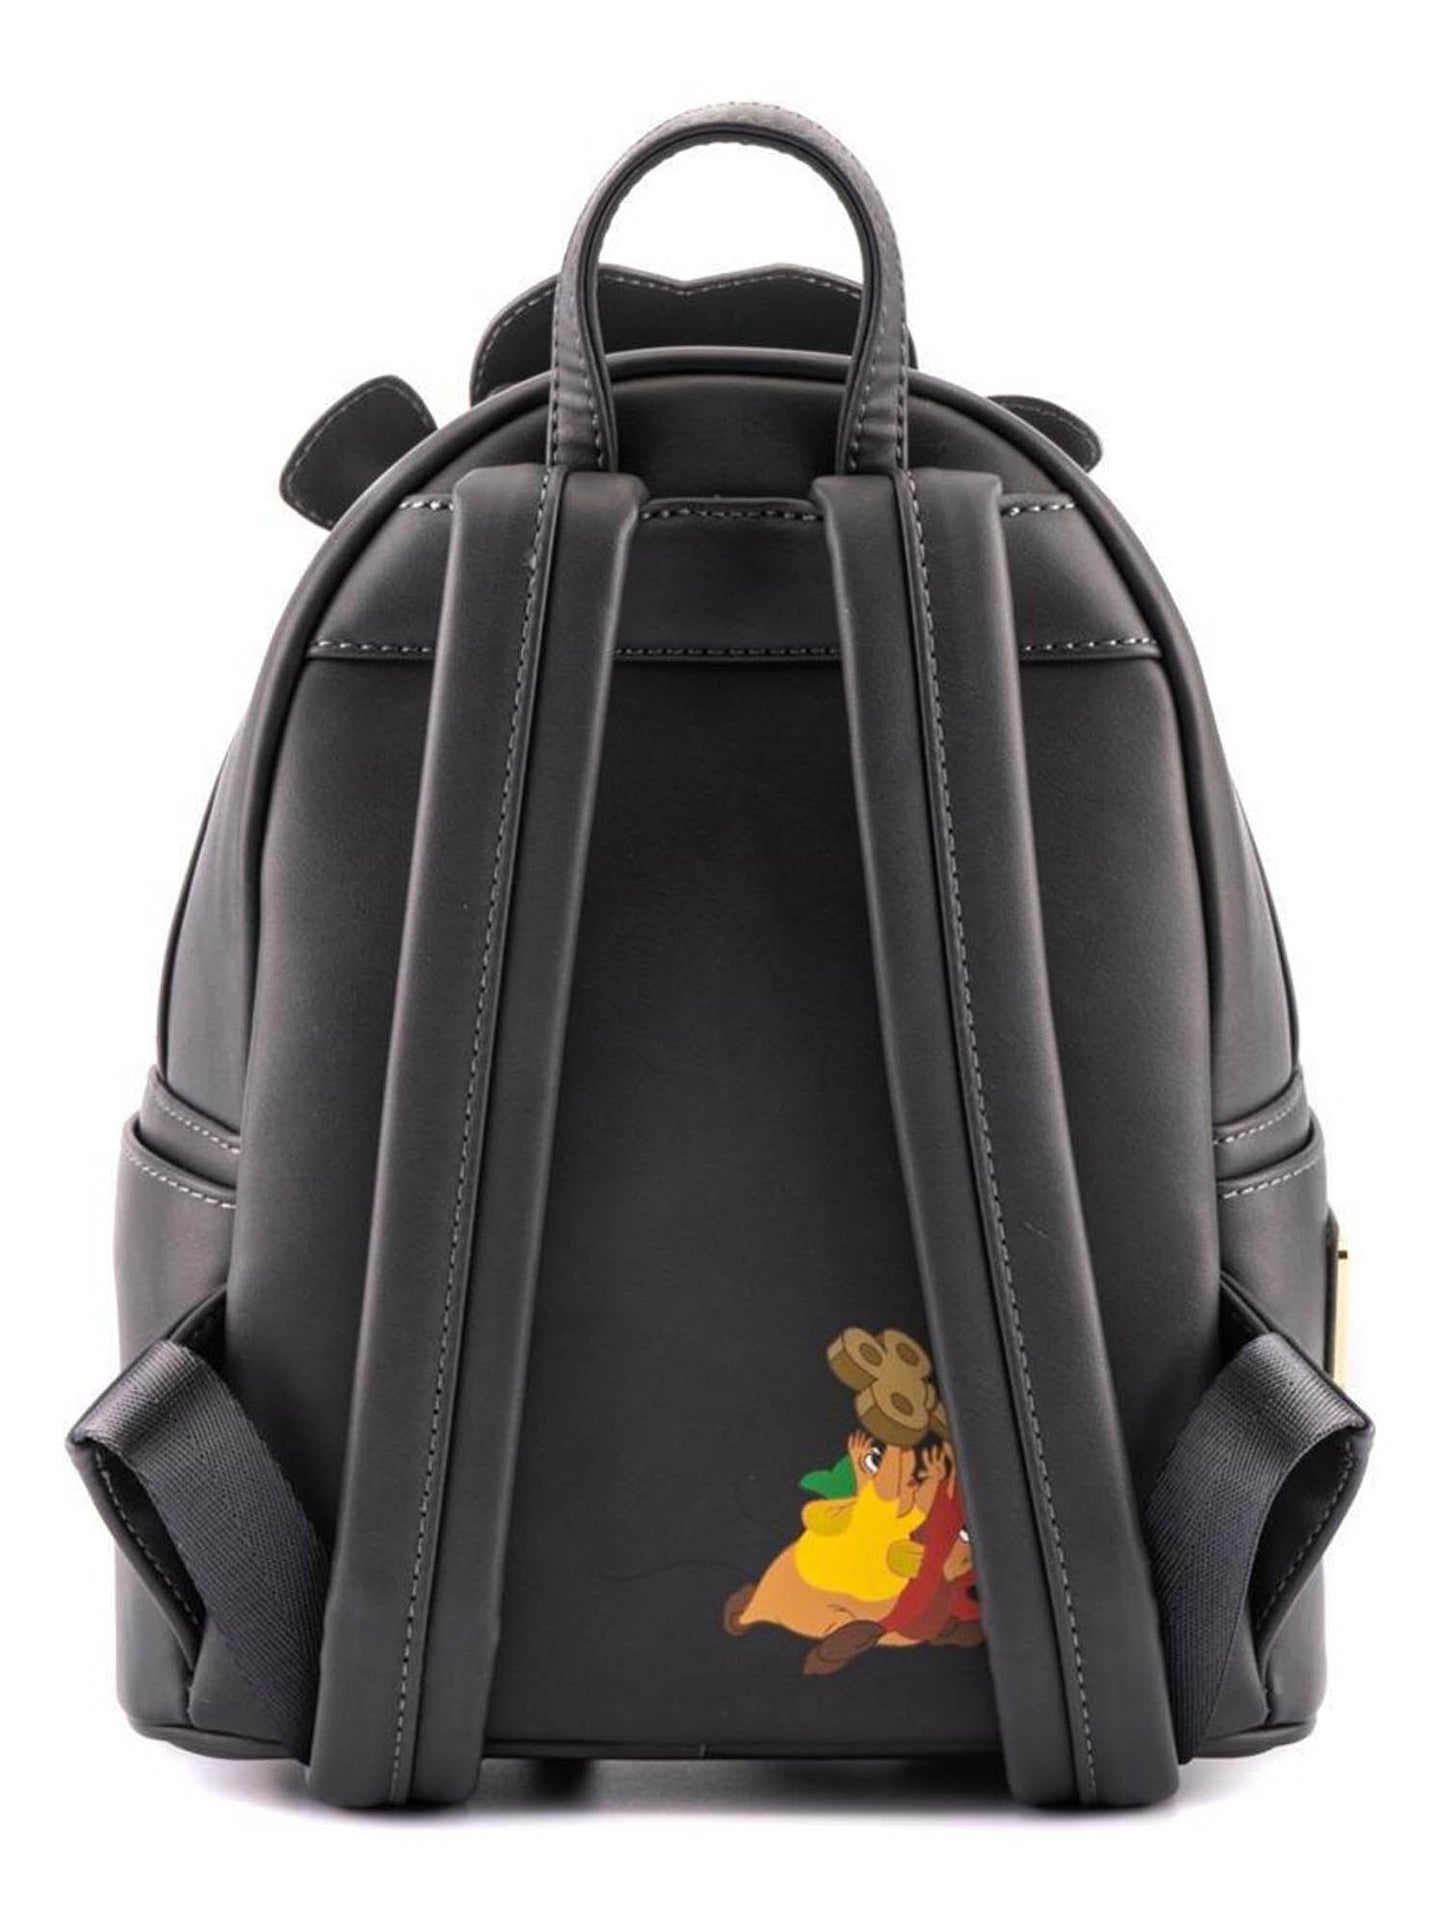 Loungefly x Disney Villains Evil Stepmother And Step Sisters Mini Backpack